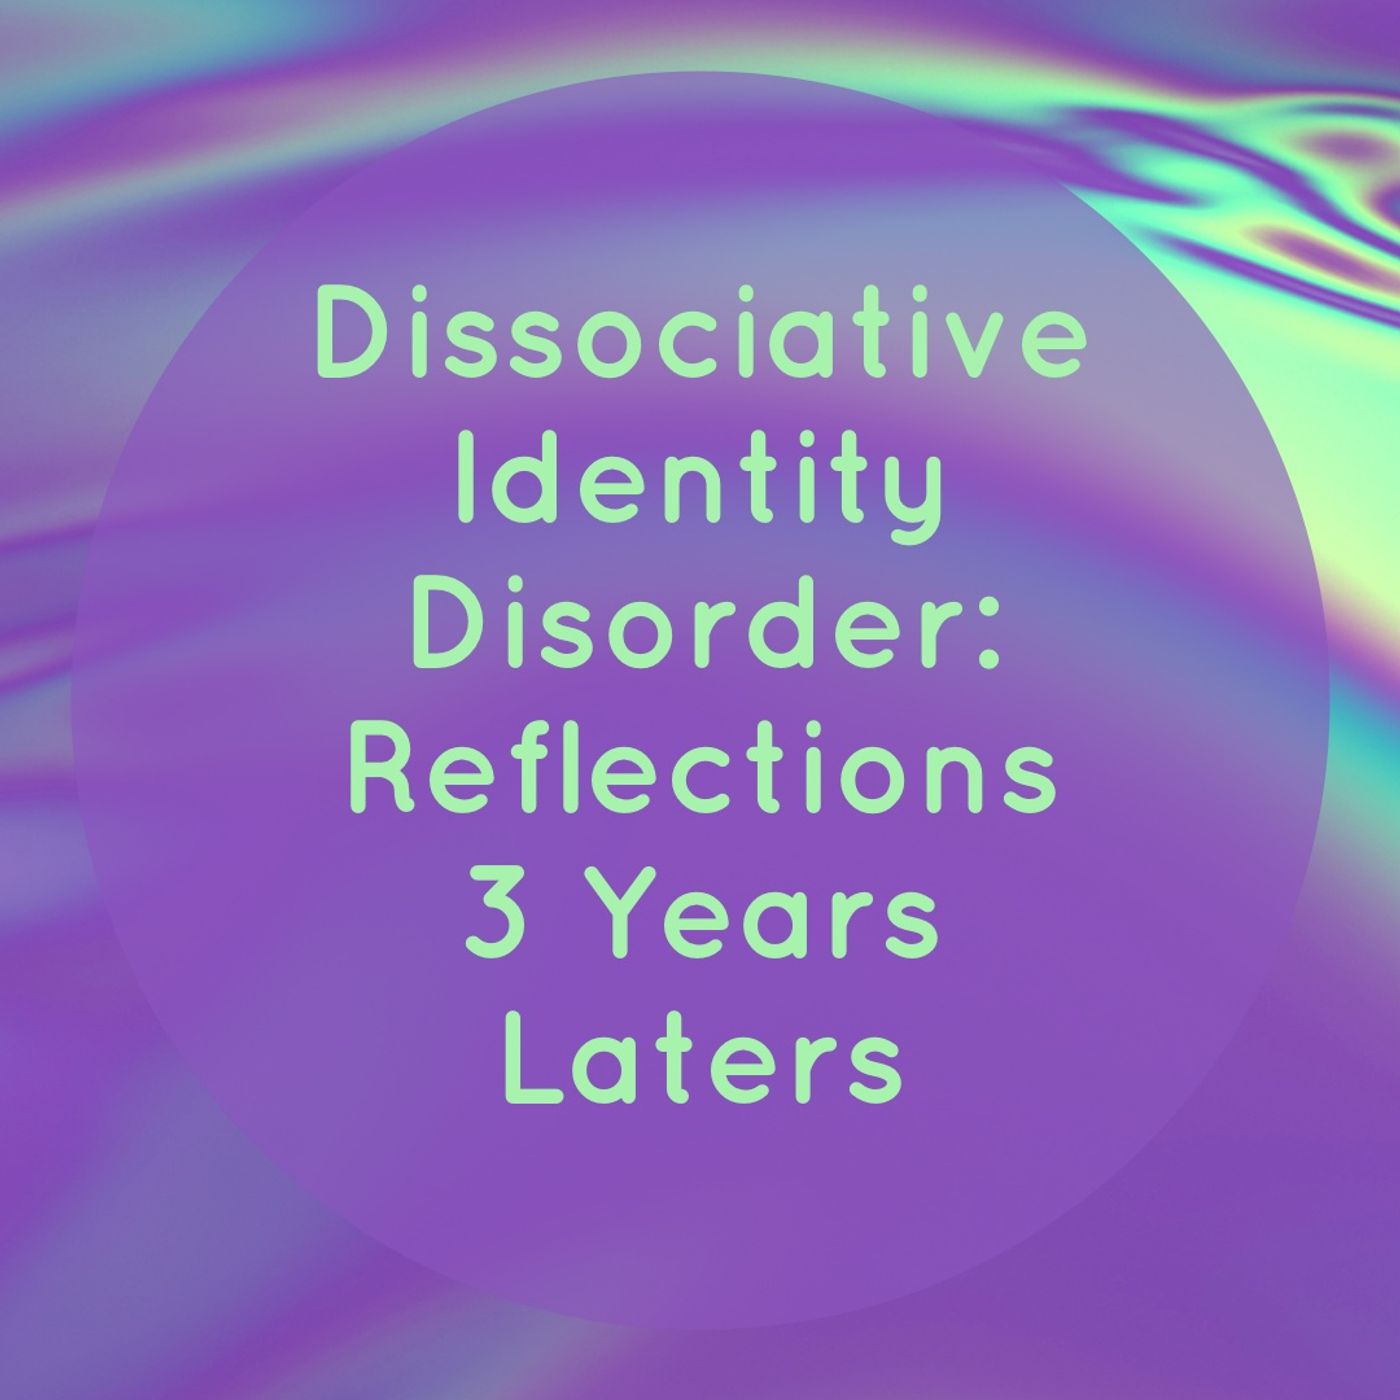 Dissociative Identity Disorder: Reflections 3 Years Later